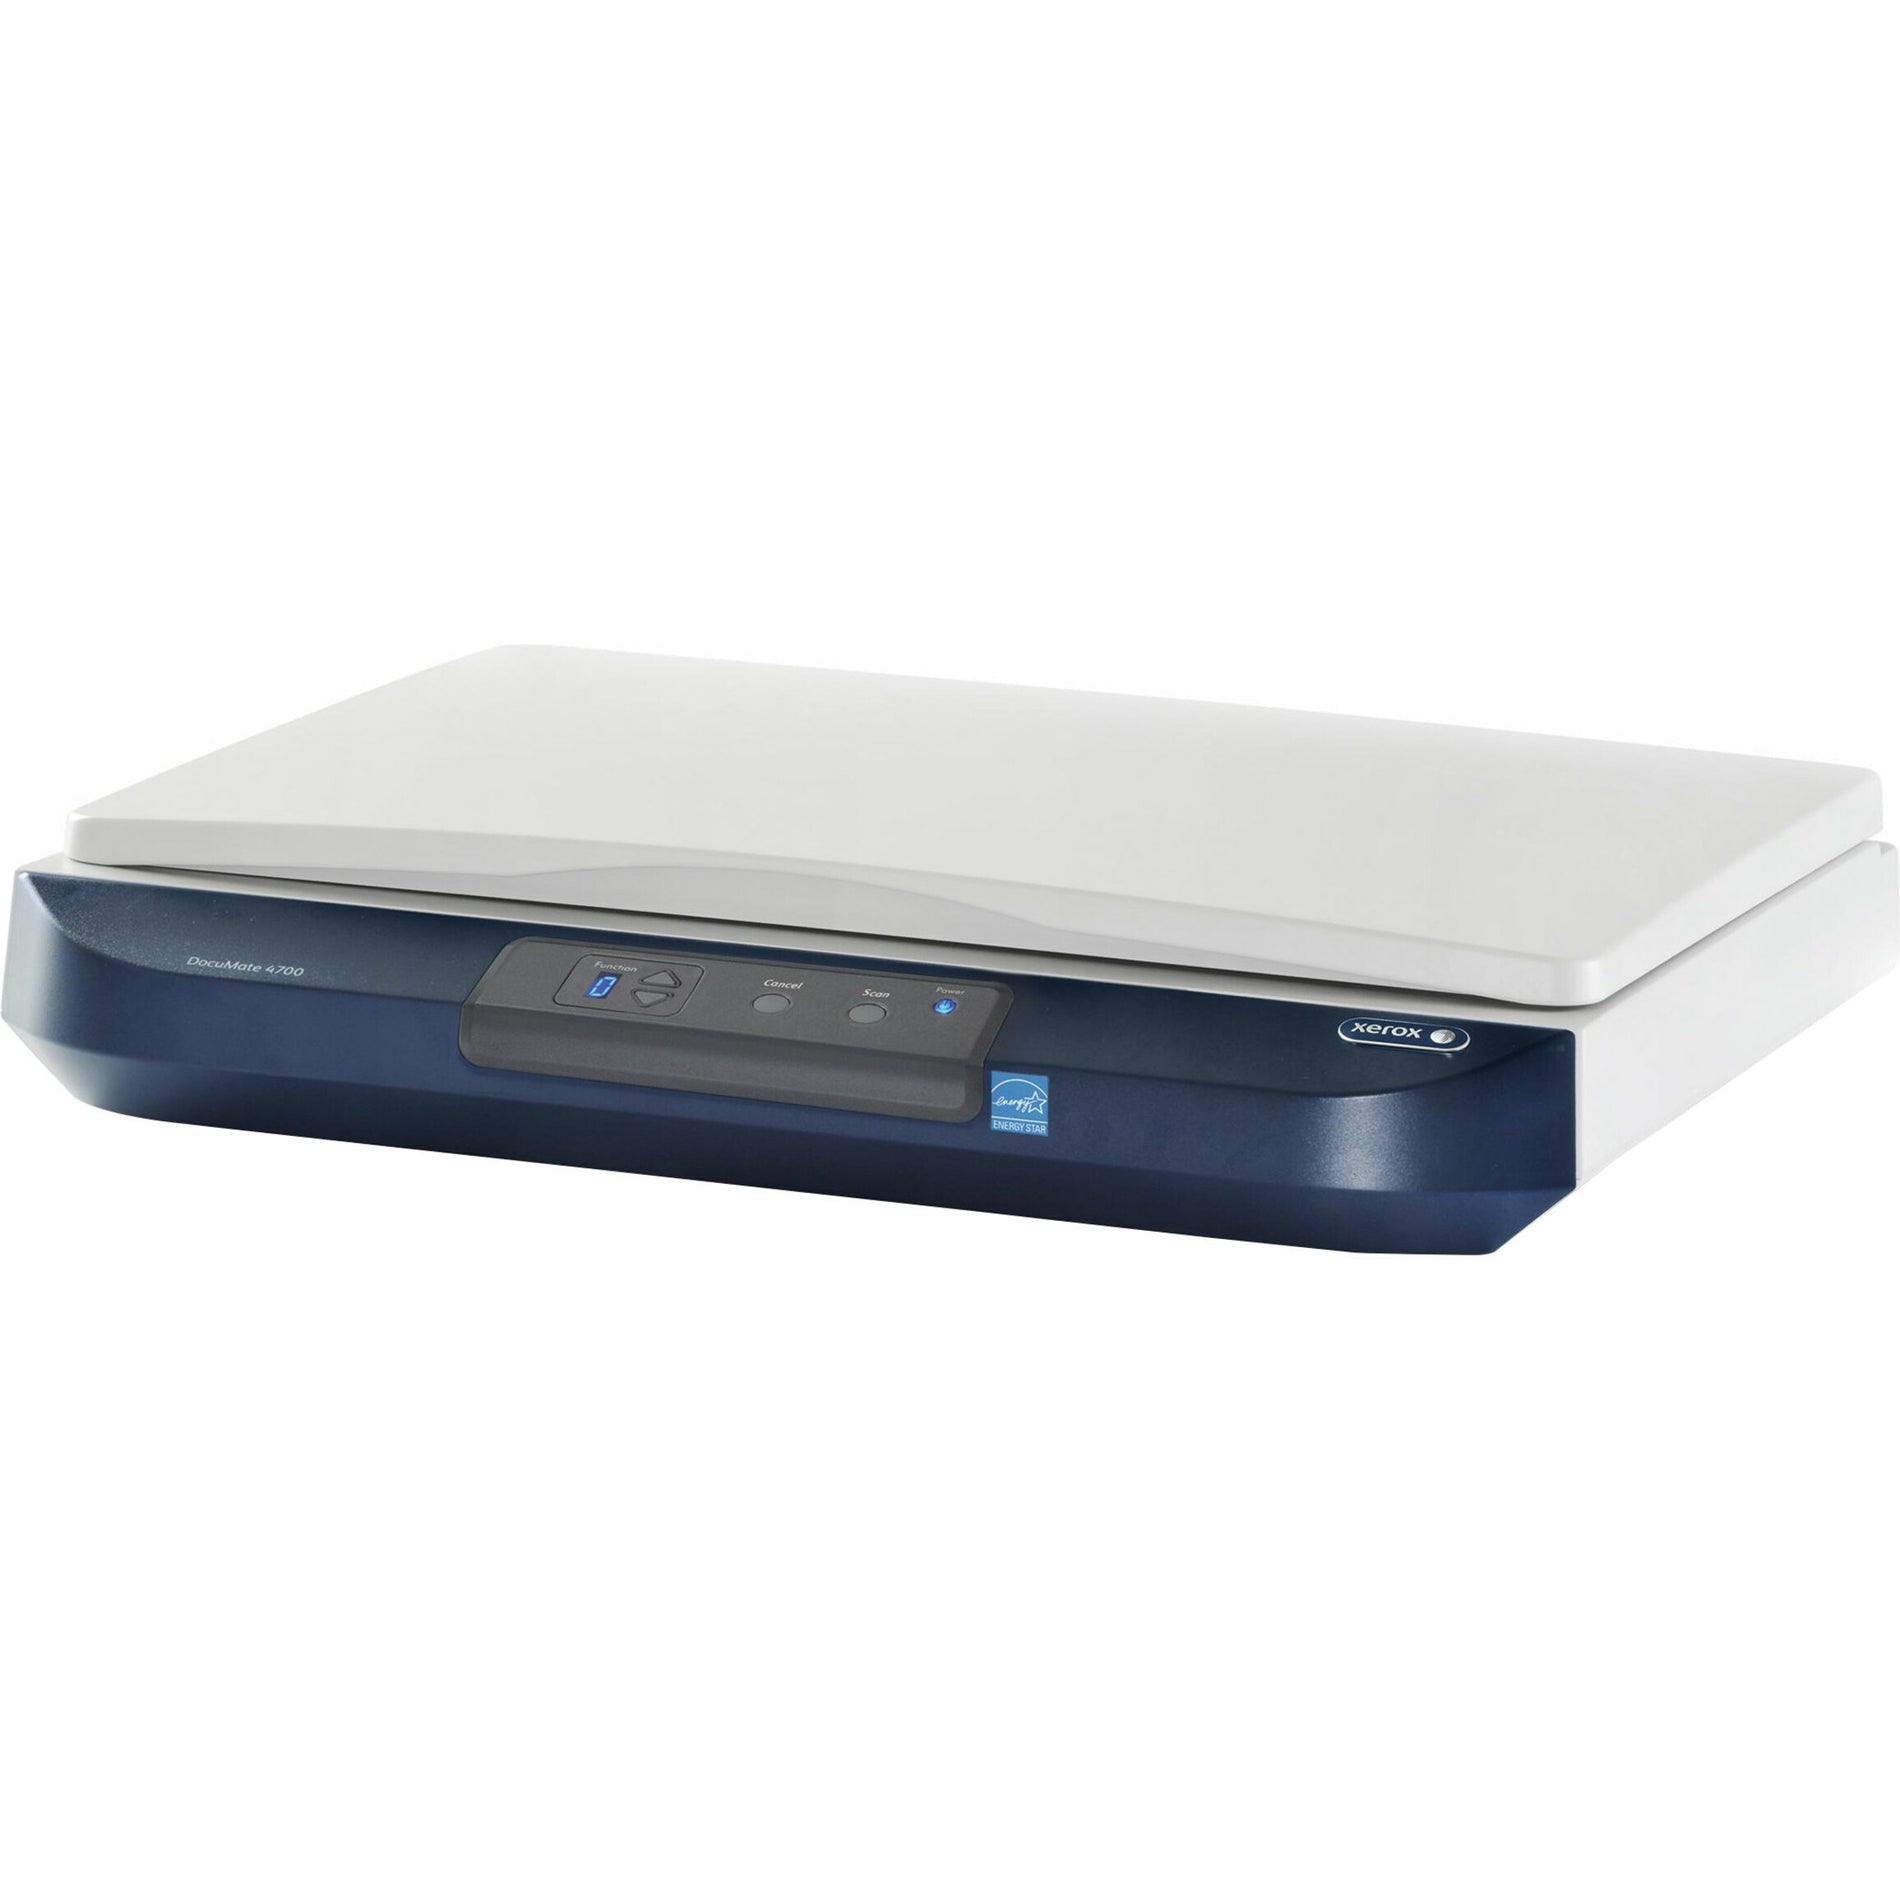 Xerox XDM47005M-WU DocuMate 4700 Large Format Flatbed Scanner - Flexible Scanning Solution for Large Documents